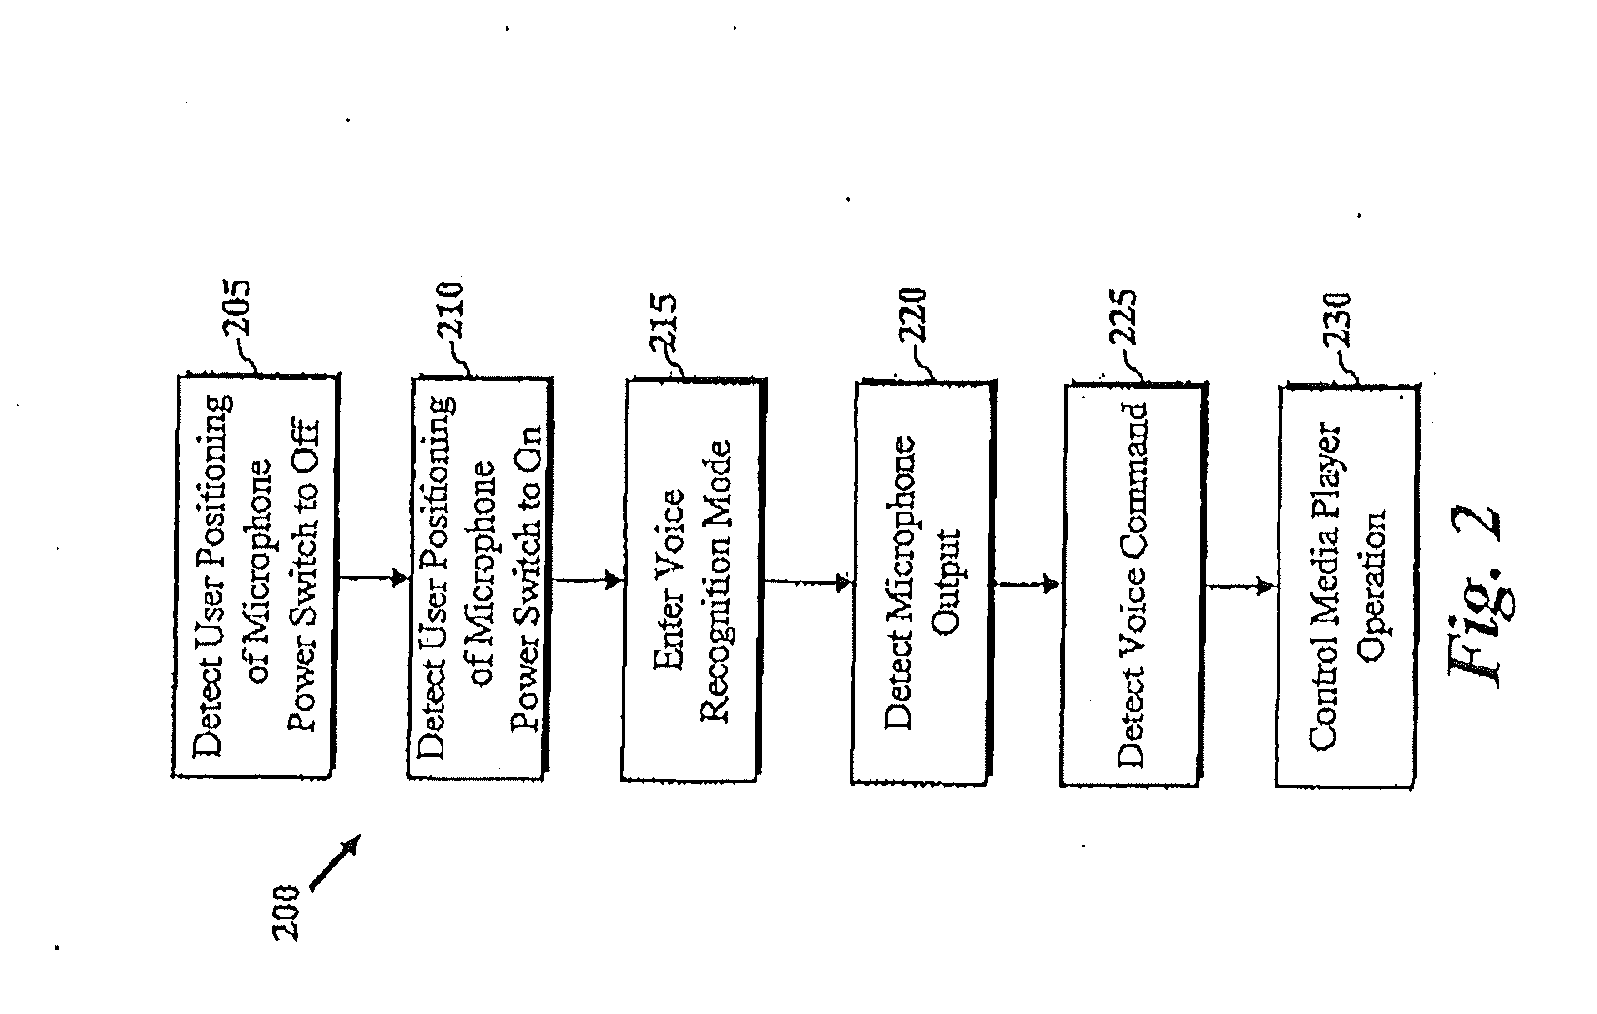 Method and Apparatus for Voice Controlled Operation of a Media Player